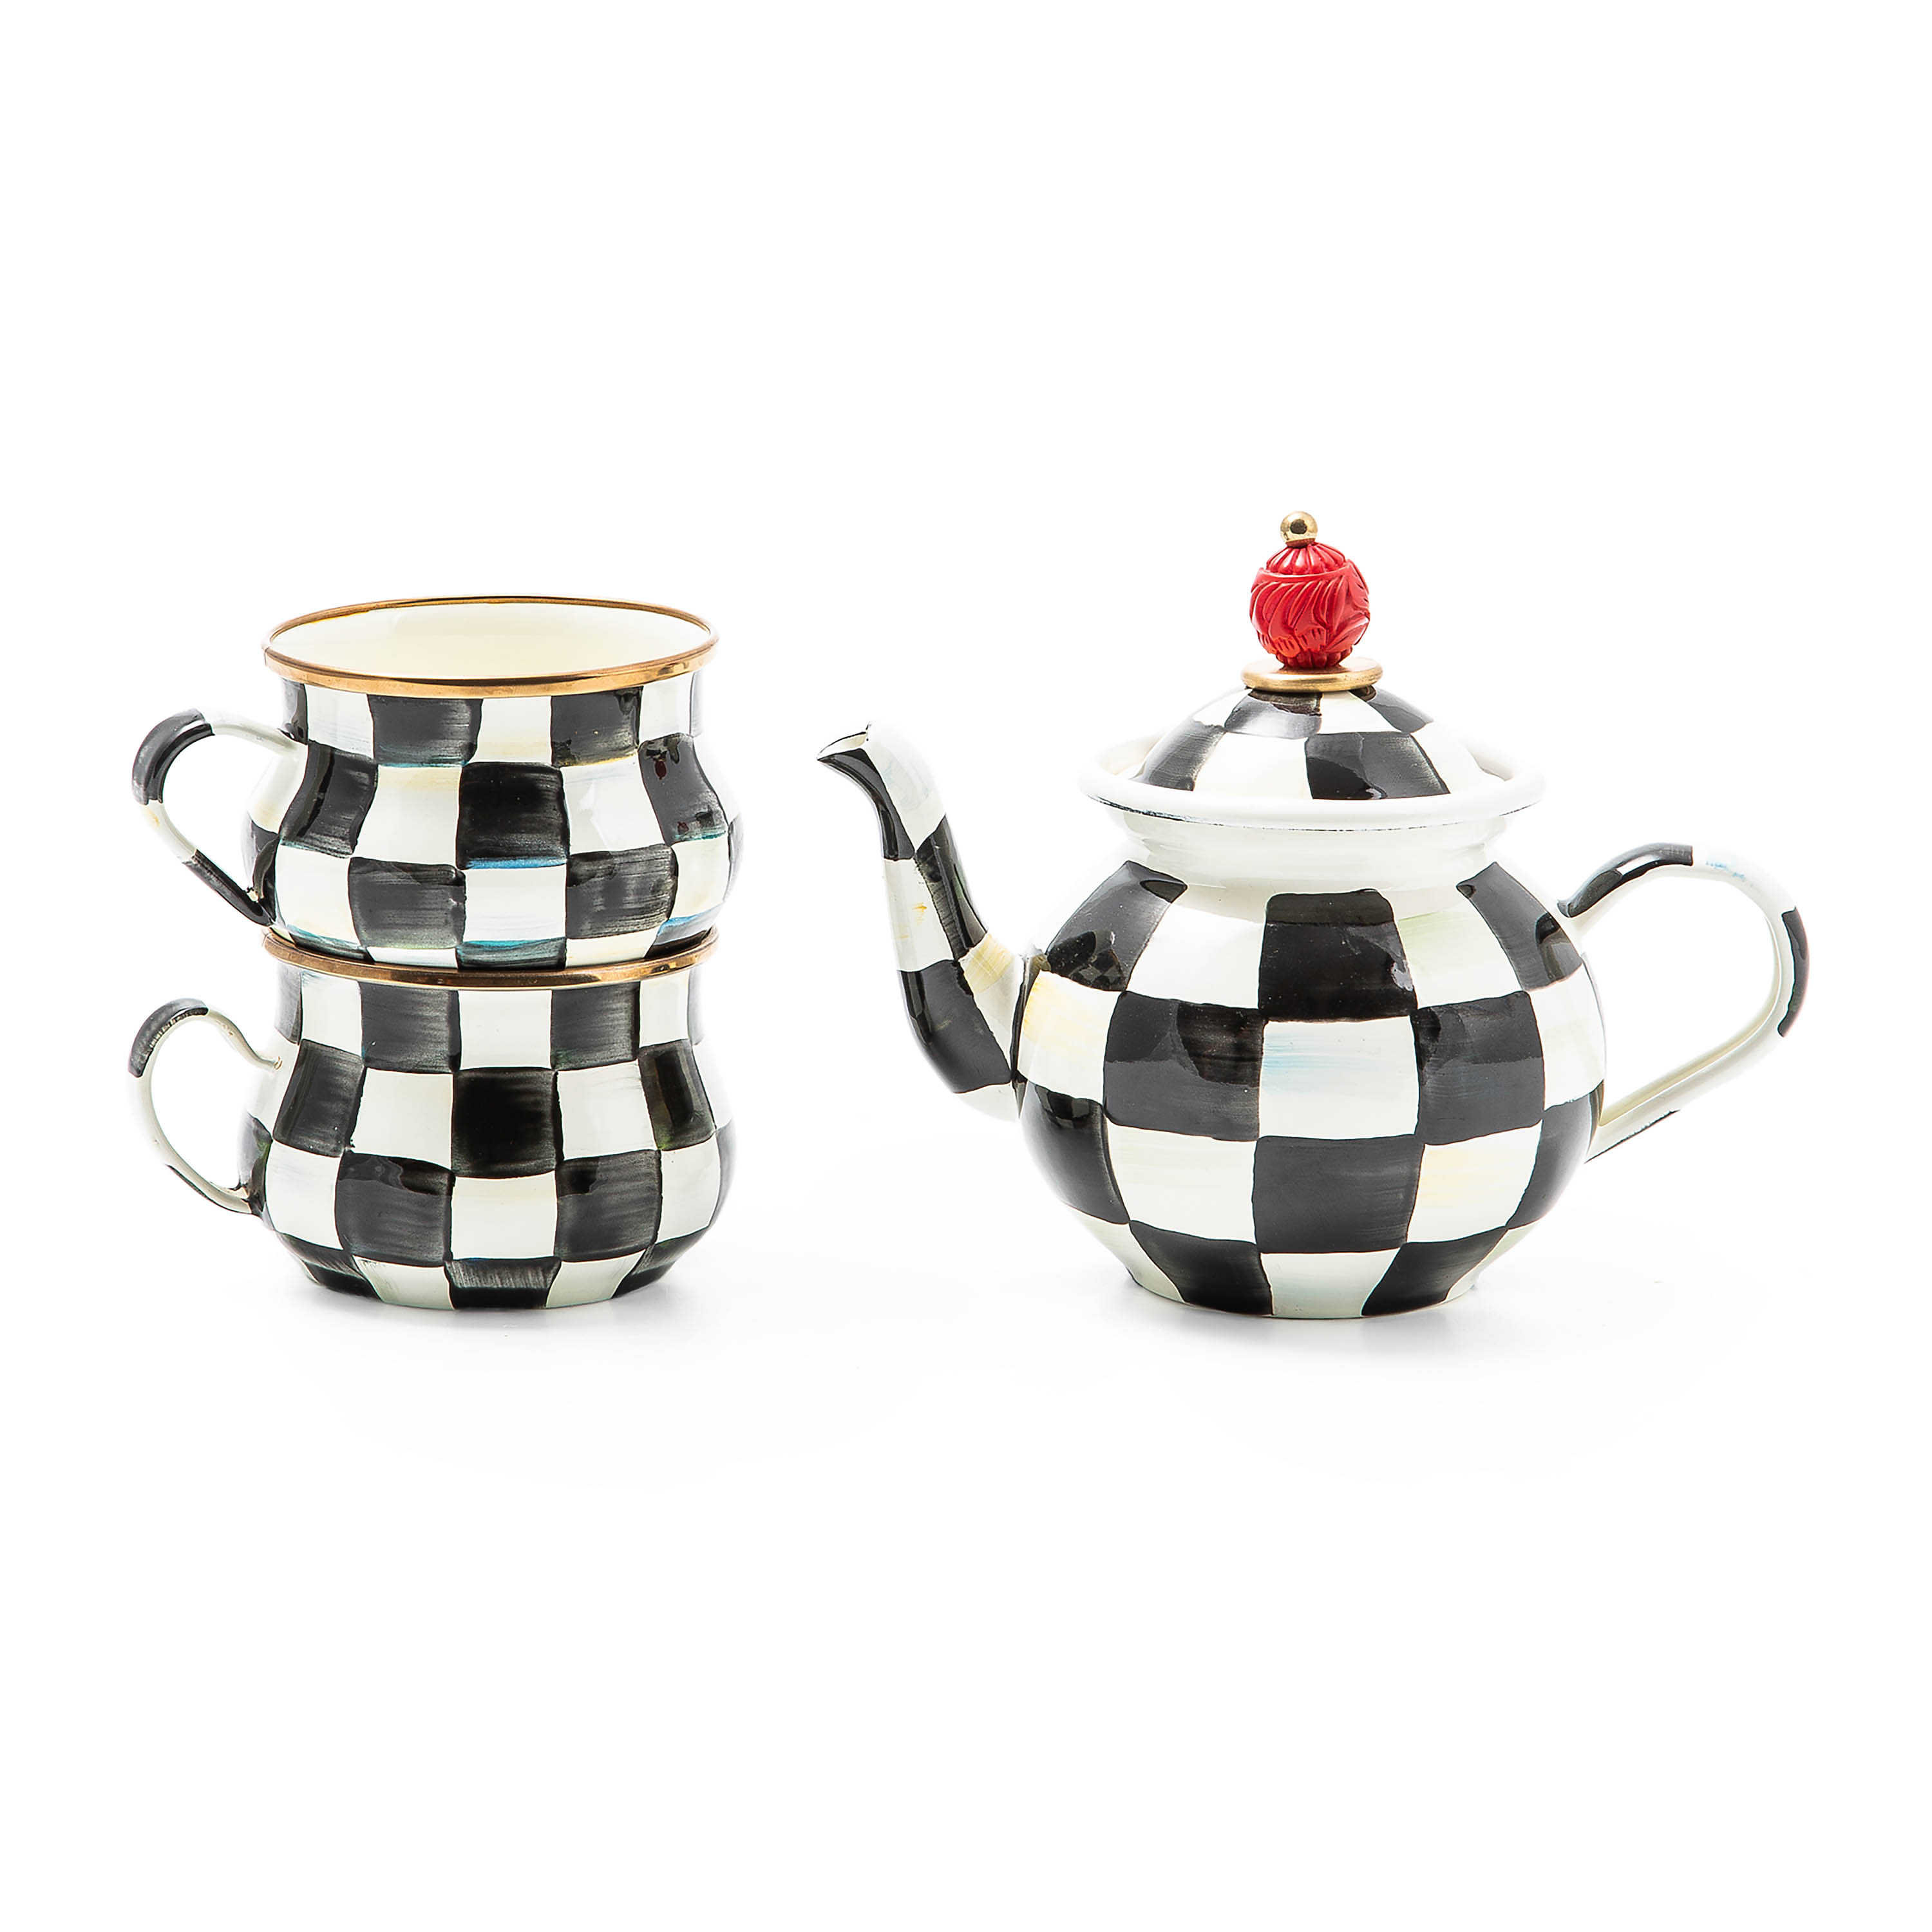 MacKenzie-Childs Courtly Check Teakettle